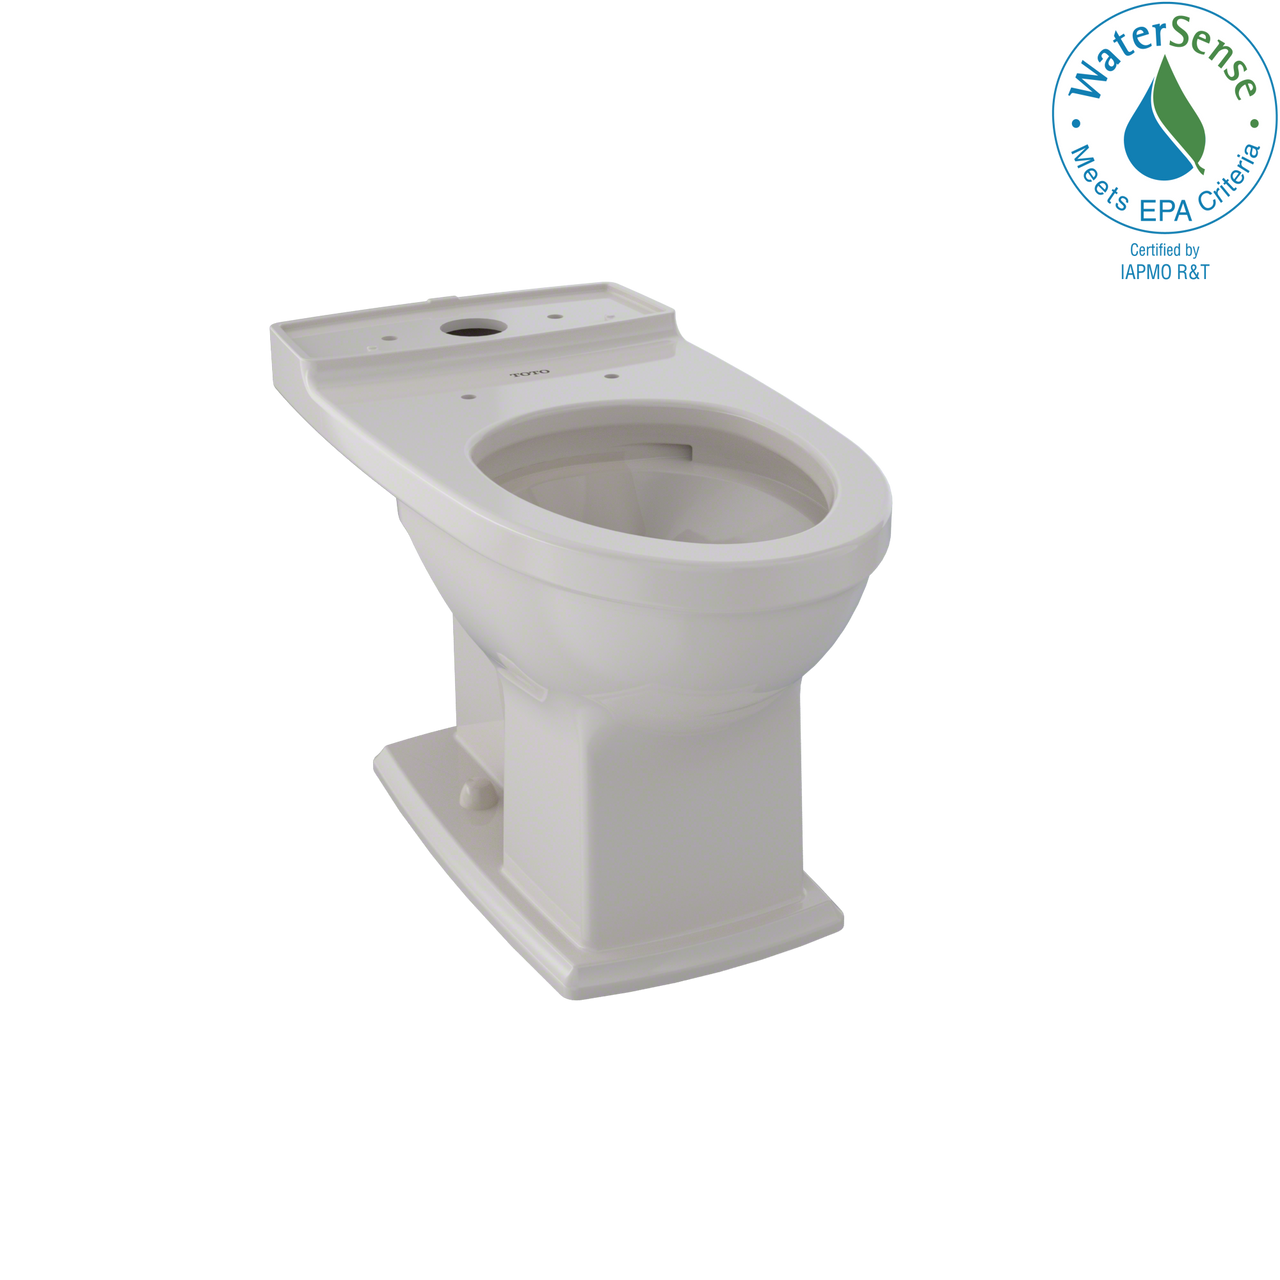 TOTO Connelly Universal Height Elongated Toilet Bowl with CeFiONtect,  - CT494CEFG#12 - BNGBath